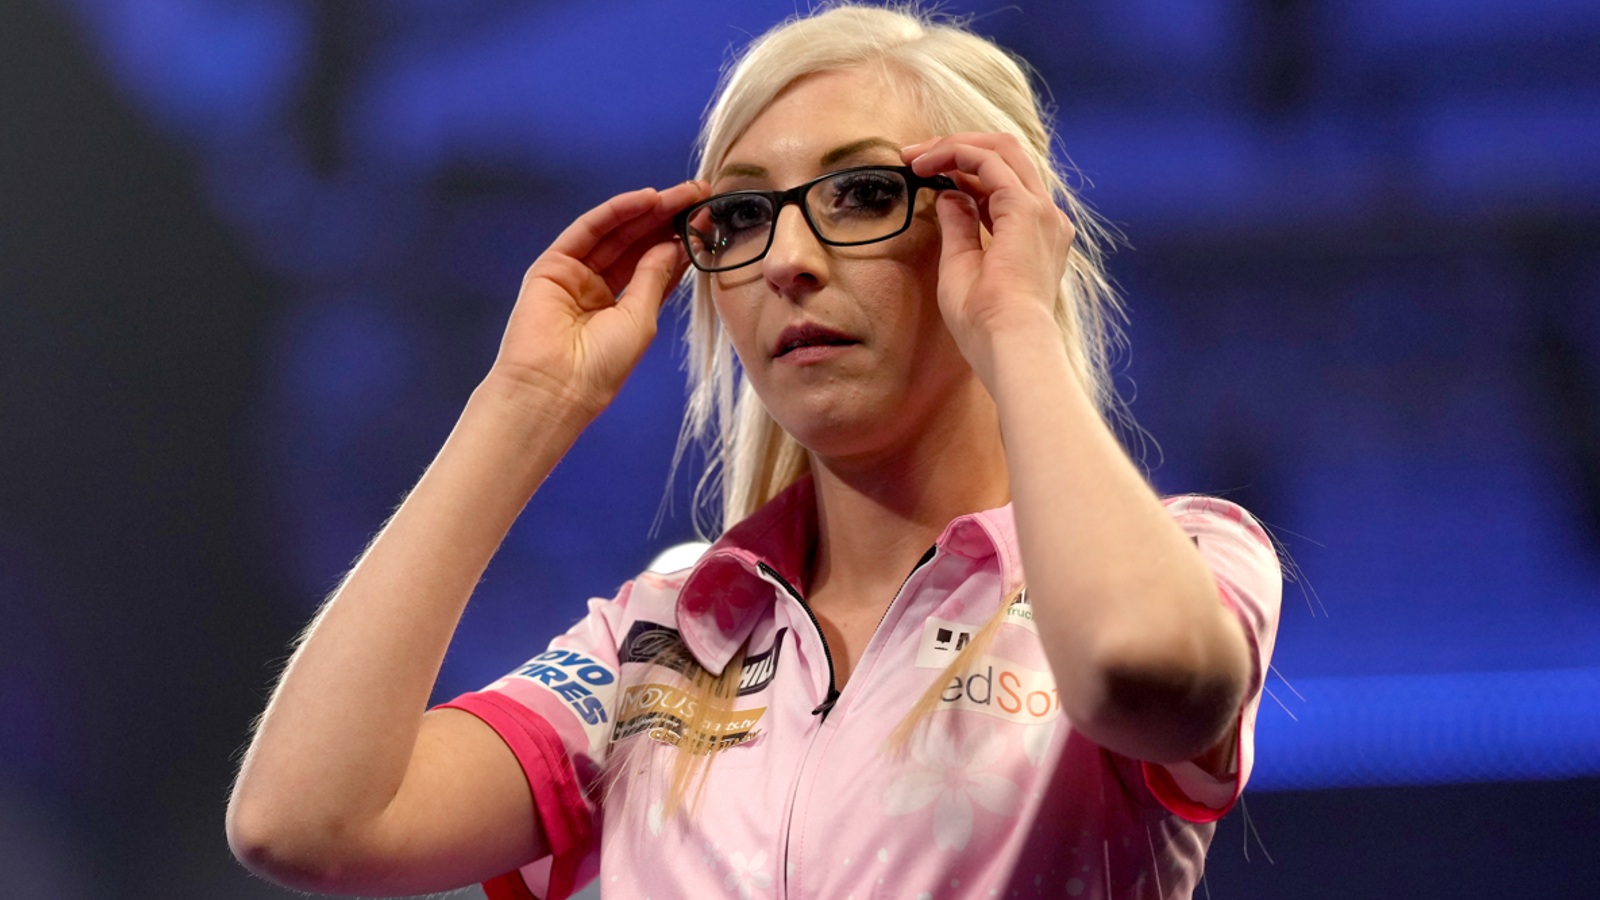 Fallon Sherrock falls short in first attempt to reach final stage of PDC Q School and earn Tour Card | Darts News